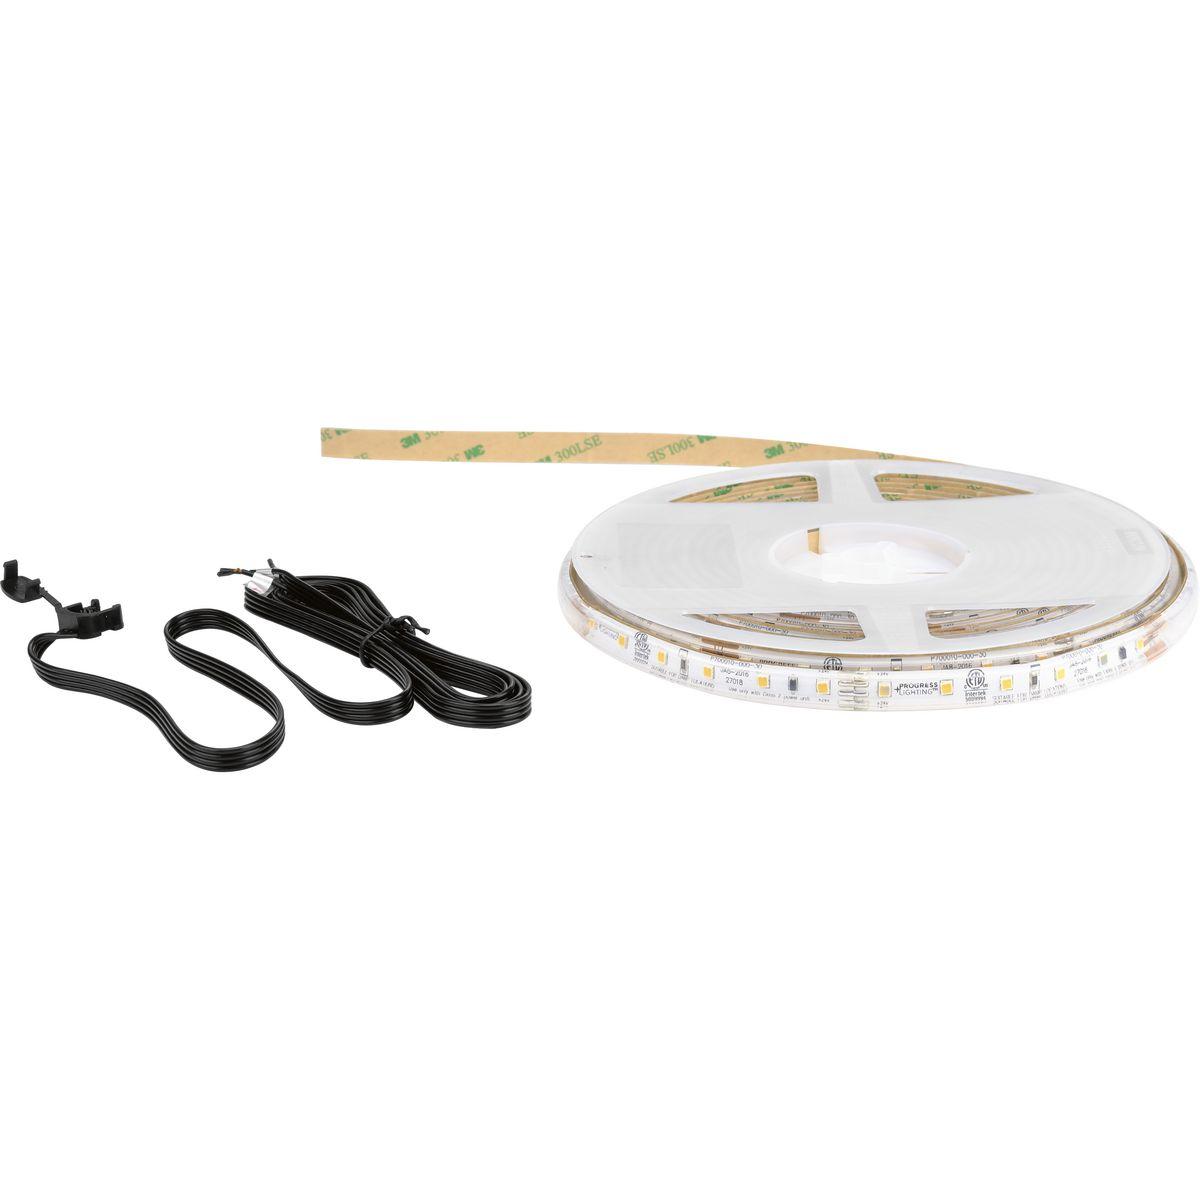 Hubbell P700010-000-27 LED Tape provides lighting to enhance aesthetics while also aiding in tasks around the home. Common applications for LED tape include undercabinet lighting in kitchens to add illumination to work surfaces, highlighting back splashes in kitchens and bathro